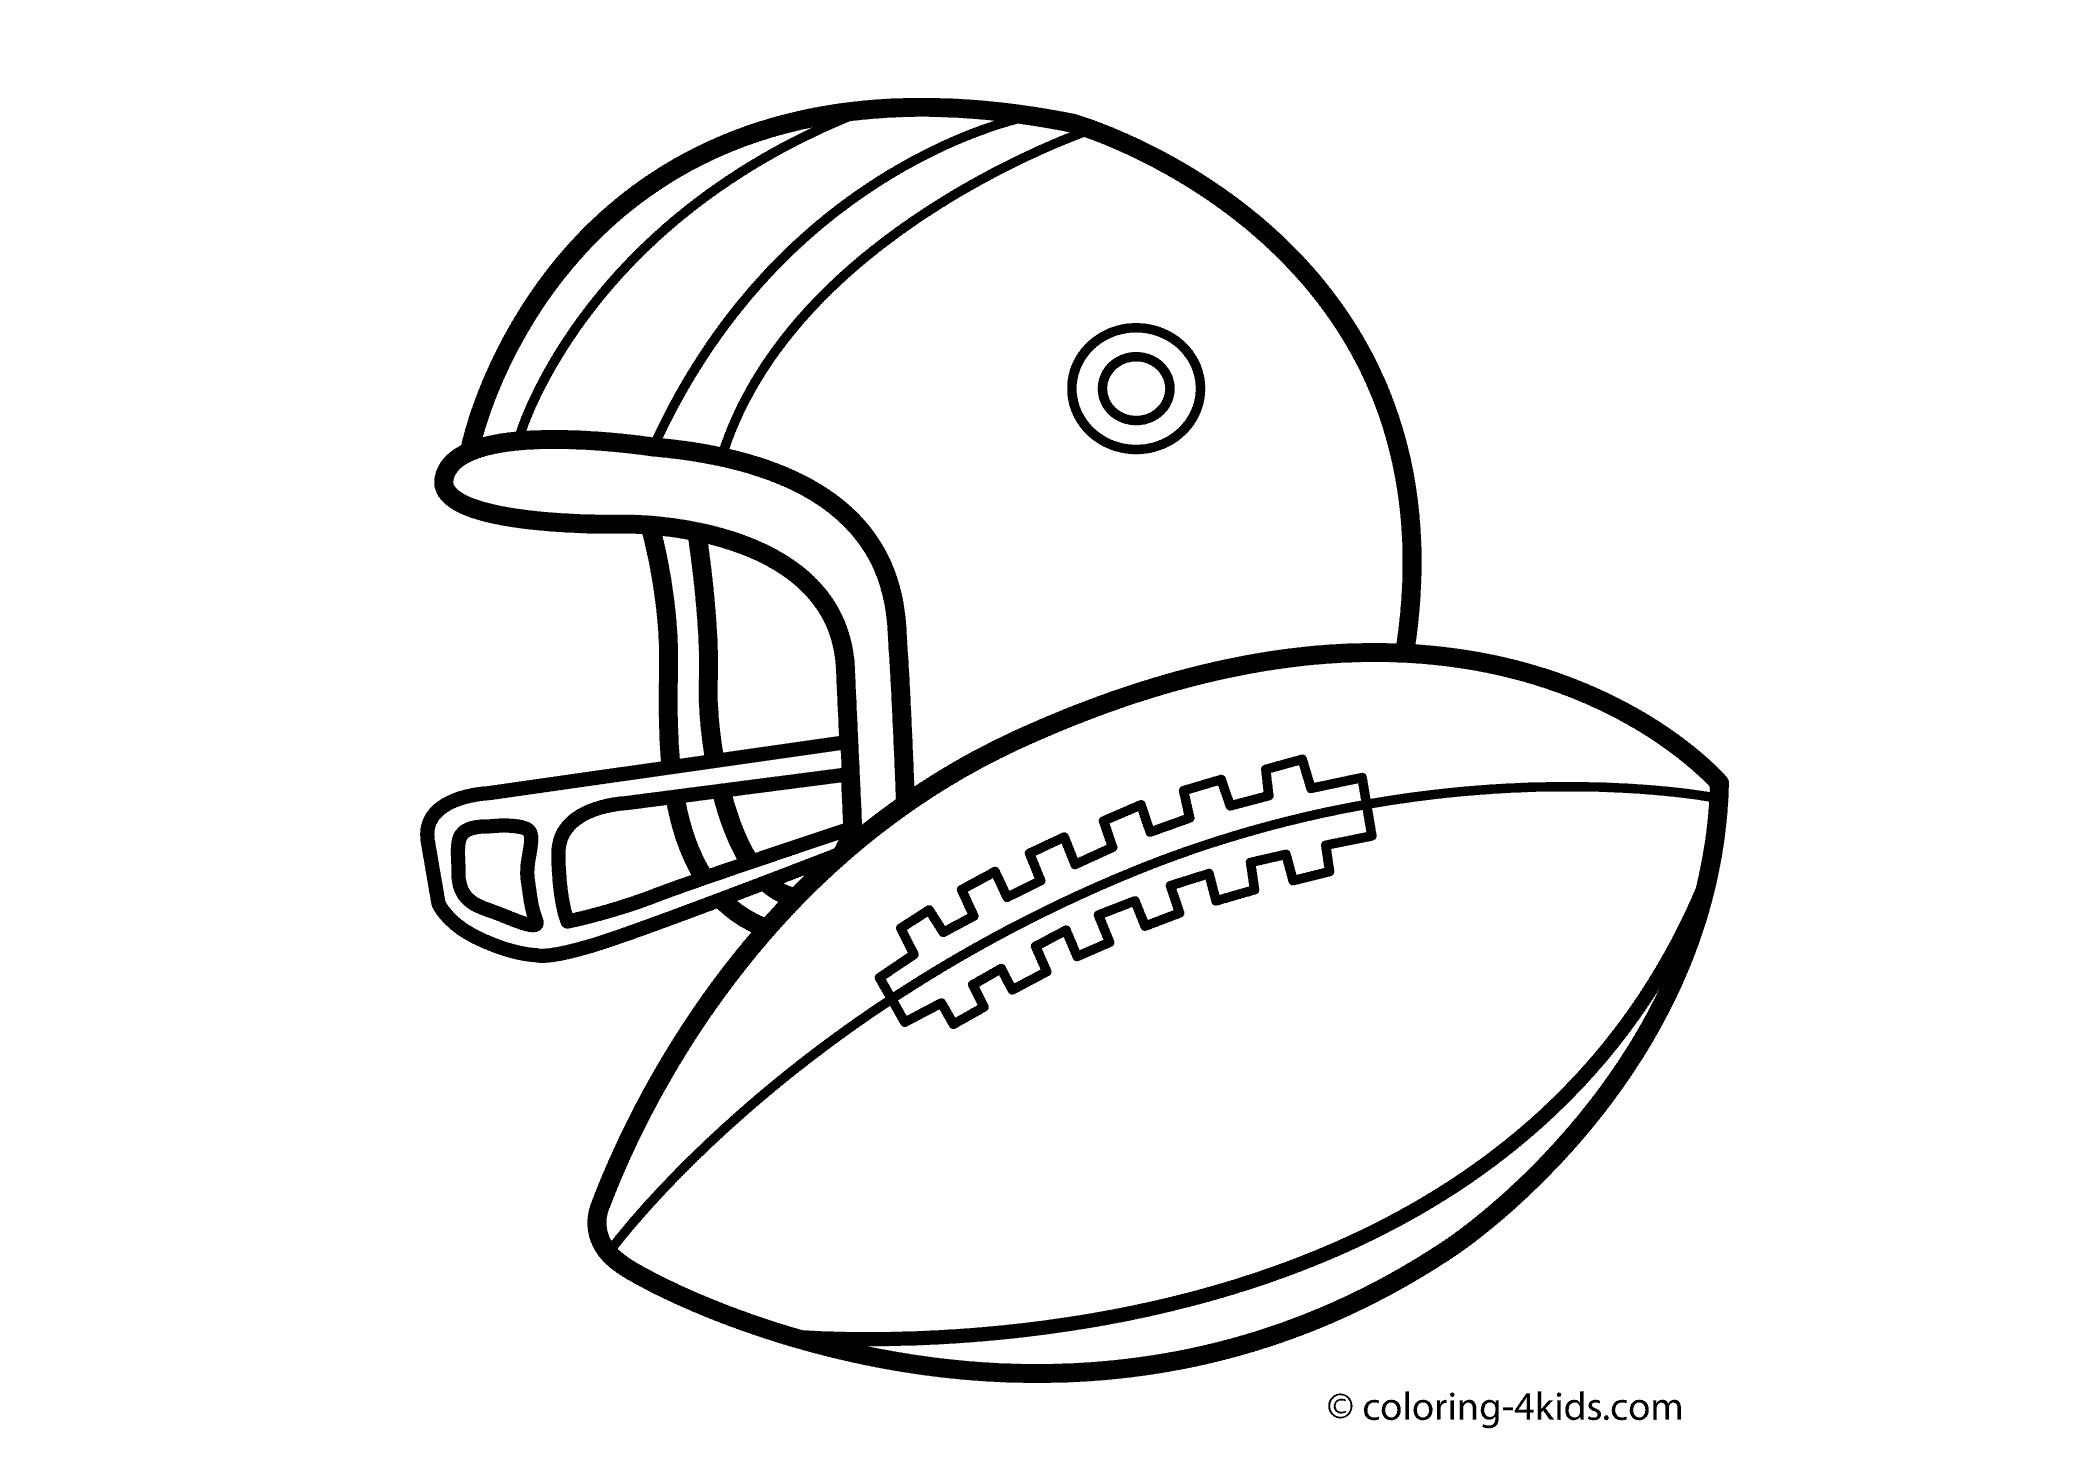 Free Coloring Pages Sports
 Sports Balls Coloring Pages Bestofcoloring